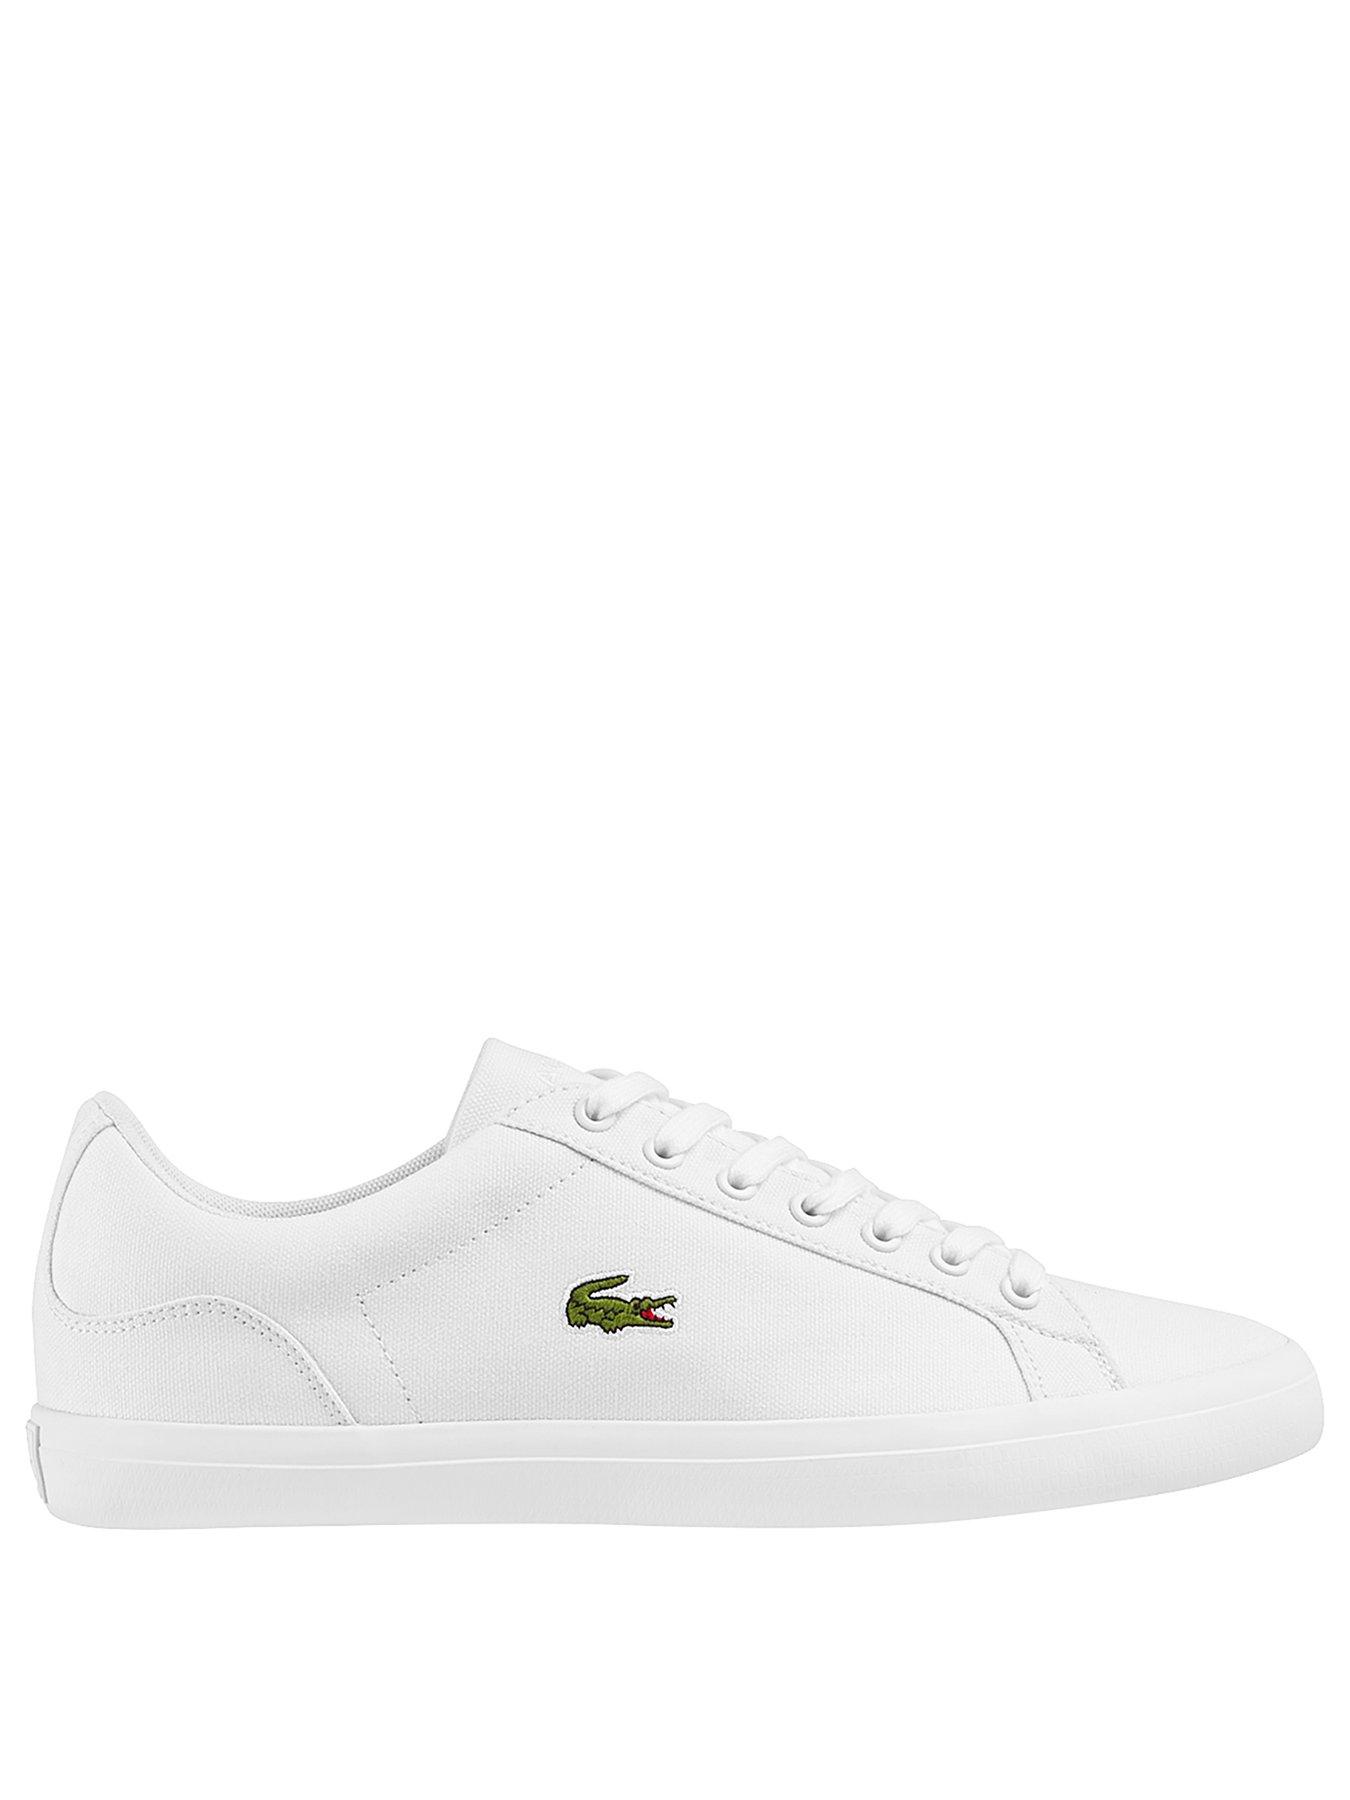 lacoste trainers sale